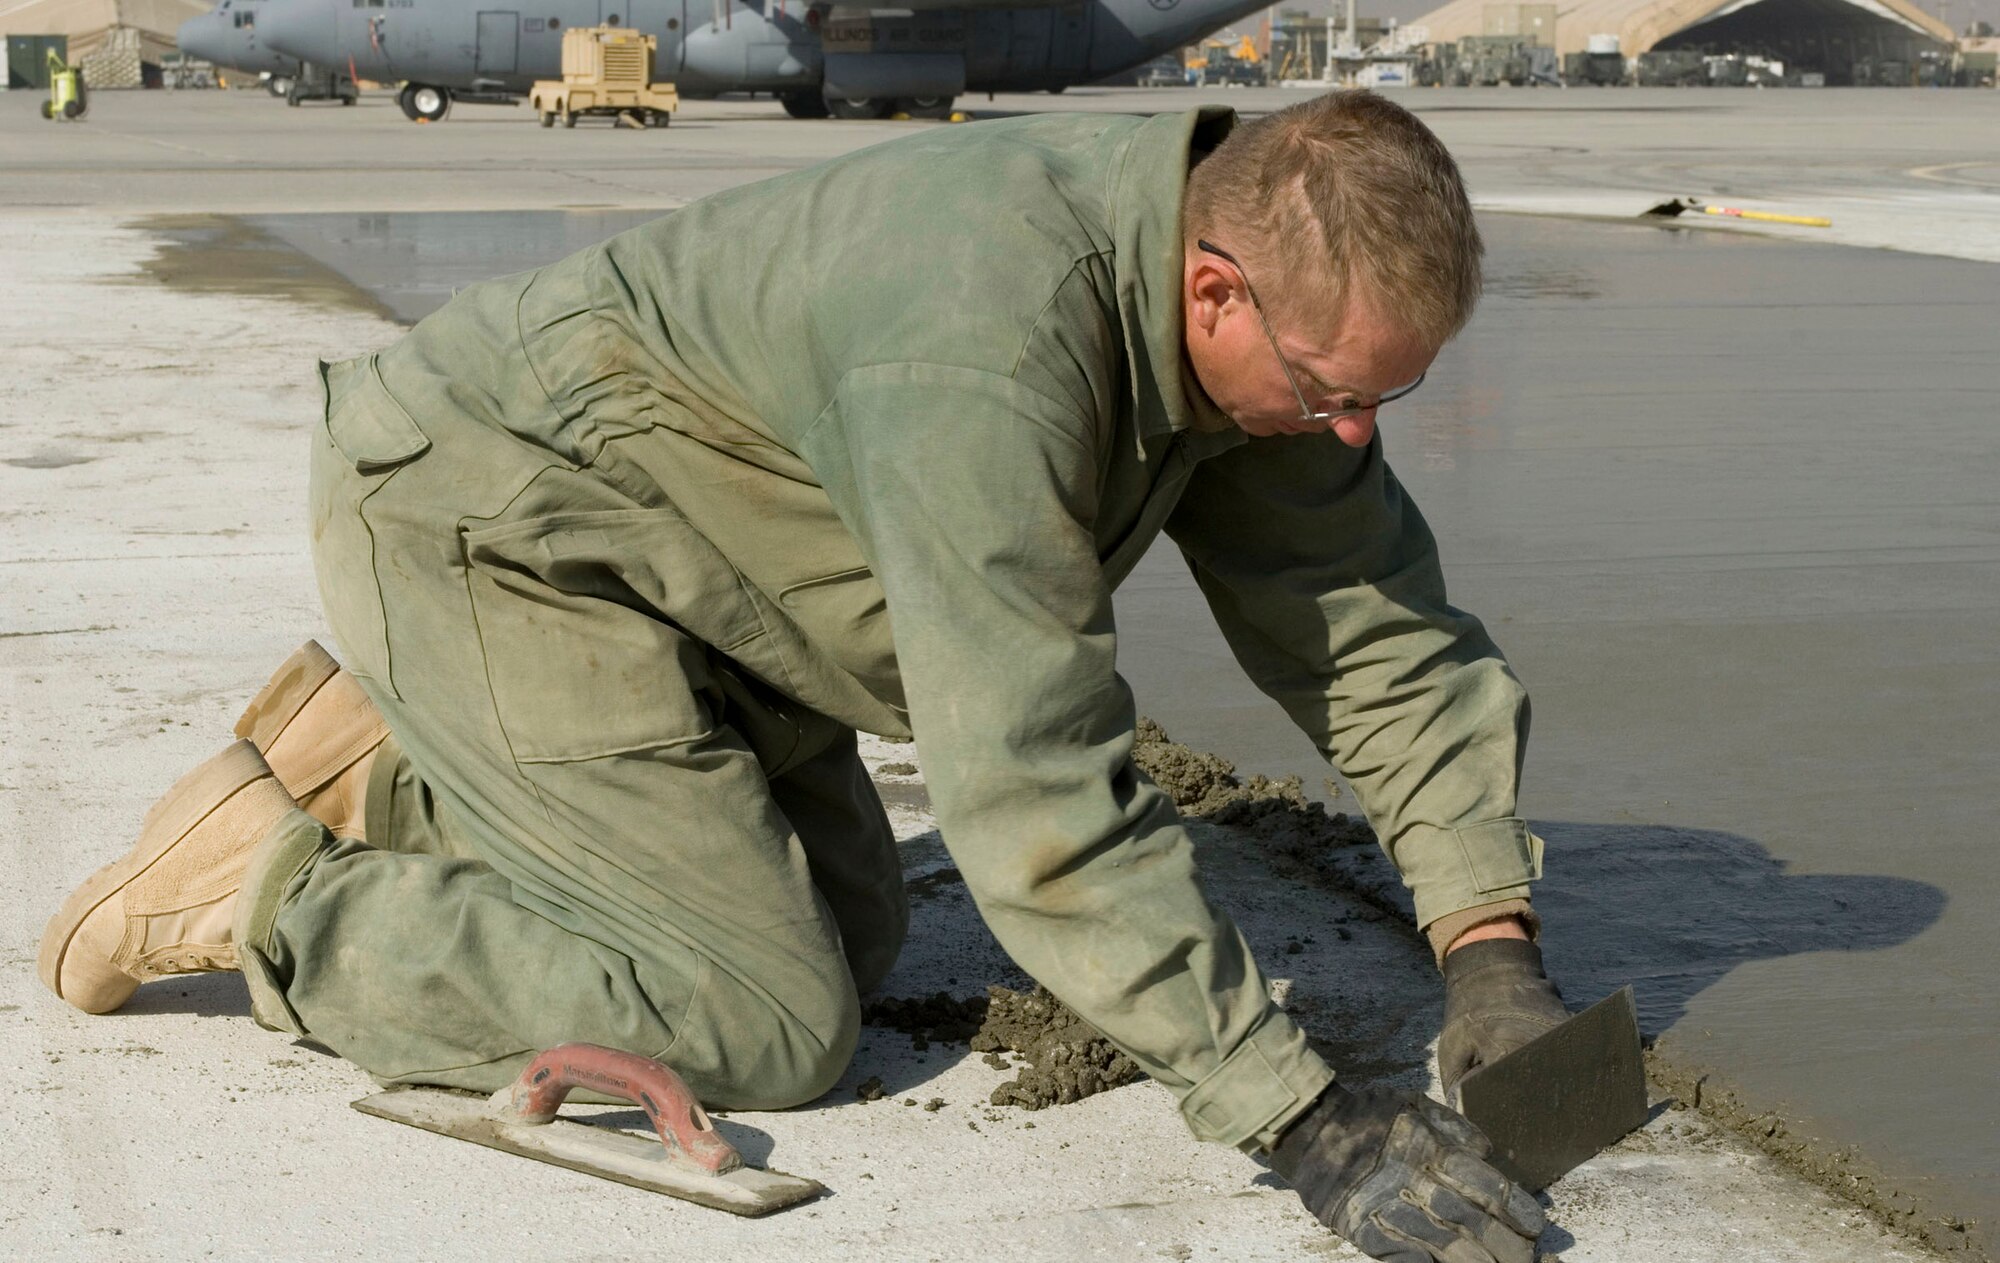 Staff Sgt. Edward Sells, a 455th Expeditionary Civil Engineer Squadron "dirt boy," smoothes freshly poured concrete on the flightline at Bagram Air Field, Afghanistan, Nov. 25. More than 3,500 cubic meters of concrete are being poured this AEF rotation to expand and construct ramps and taxiways as part of airfield expansion projects. Sergeant Sells is deployed from Lackland Air Force Base, Texas. (U.S. Air Force photo by Staff Sgt. Rachel Martinez) (Released) 